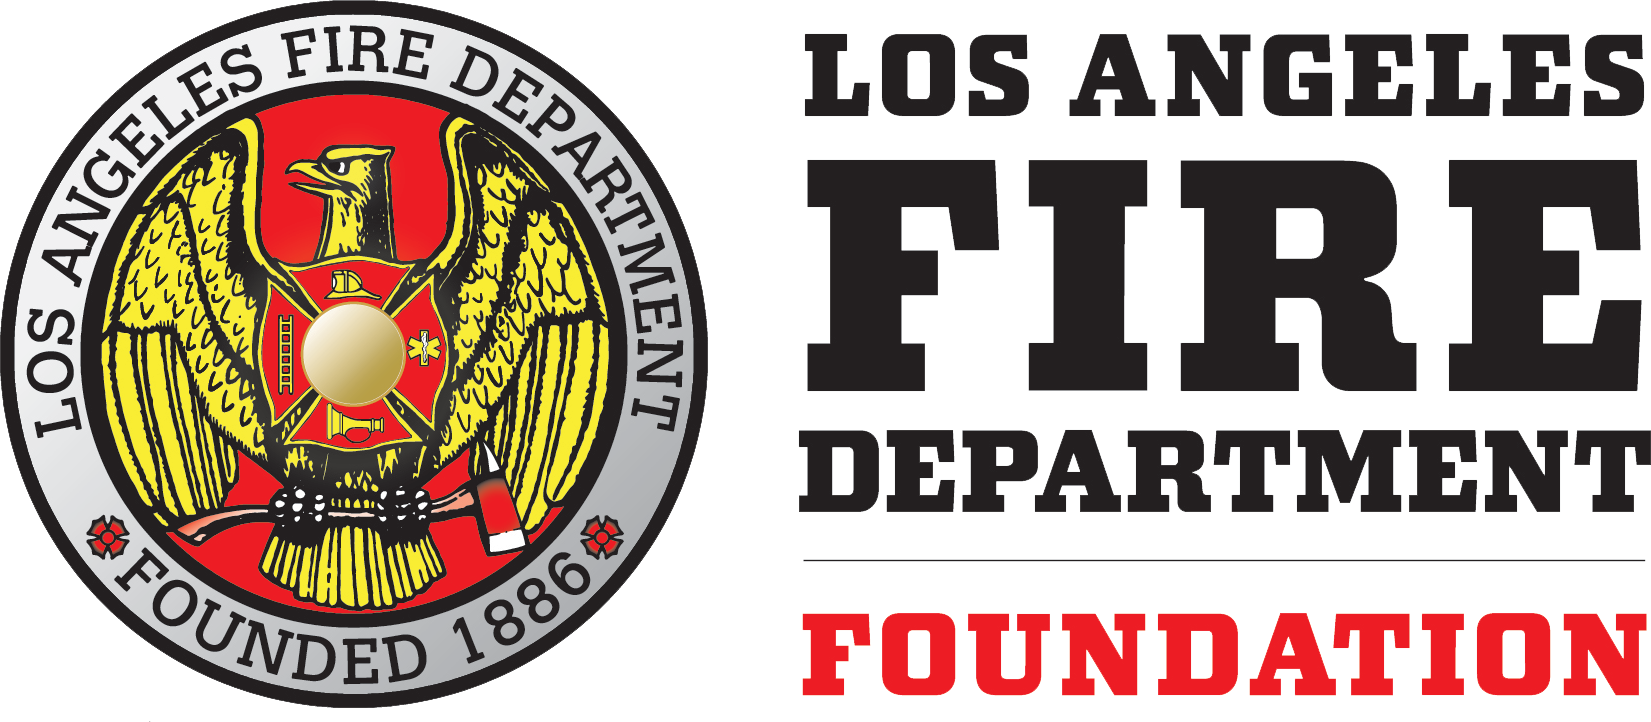 Los Angeles Fire Department Foundation - Founded 1886